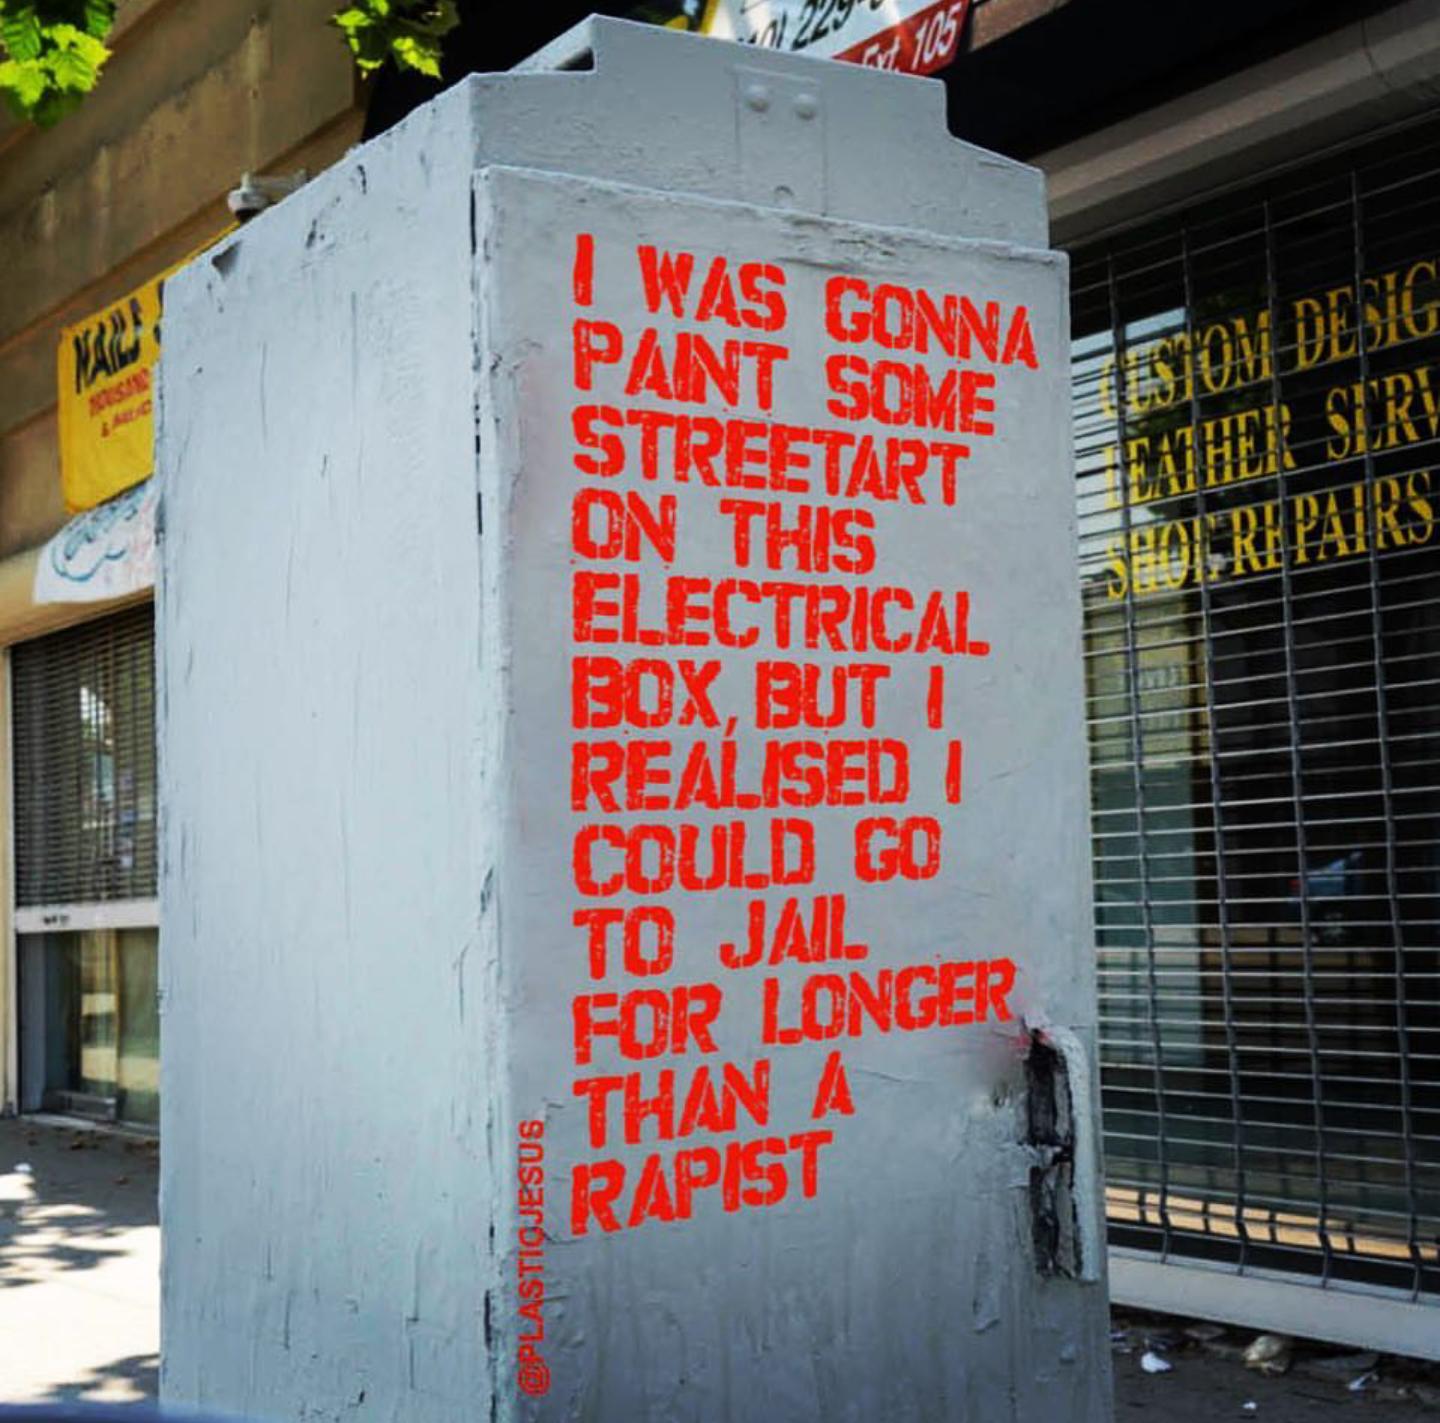 Stenciled letters onto a street electrical box pointing out that graffiti artists go longer to jail than some rapists.